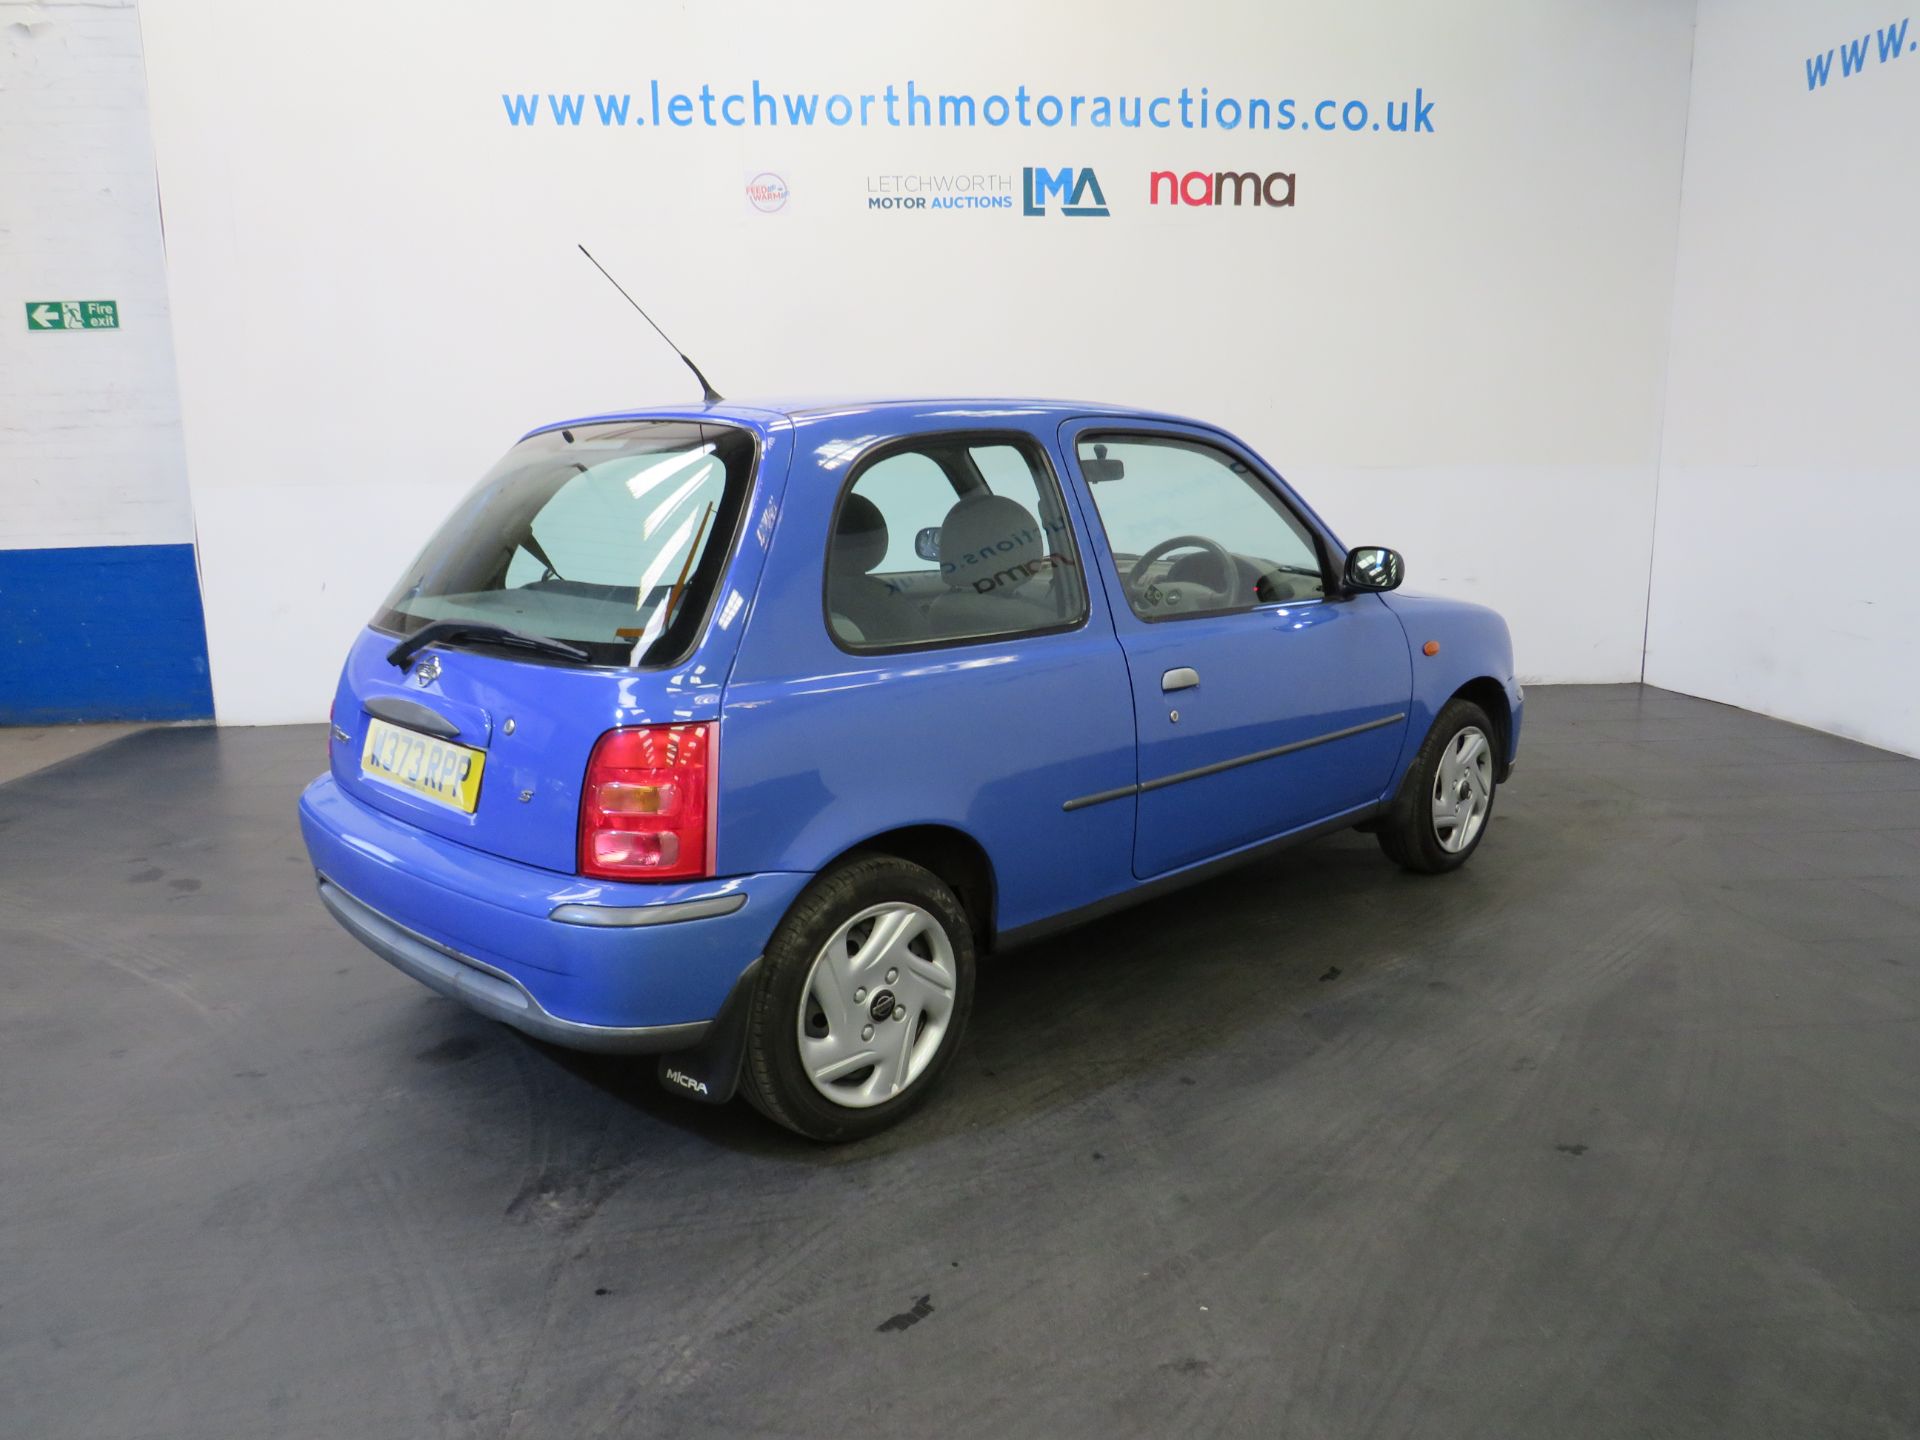 2000 Nissan Micra S - 998cc - Image 6 of 15